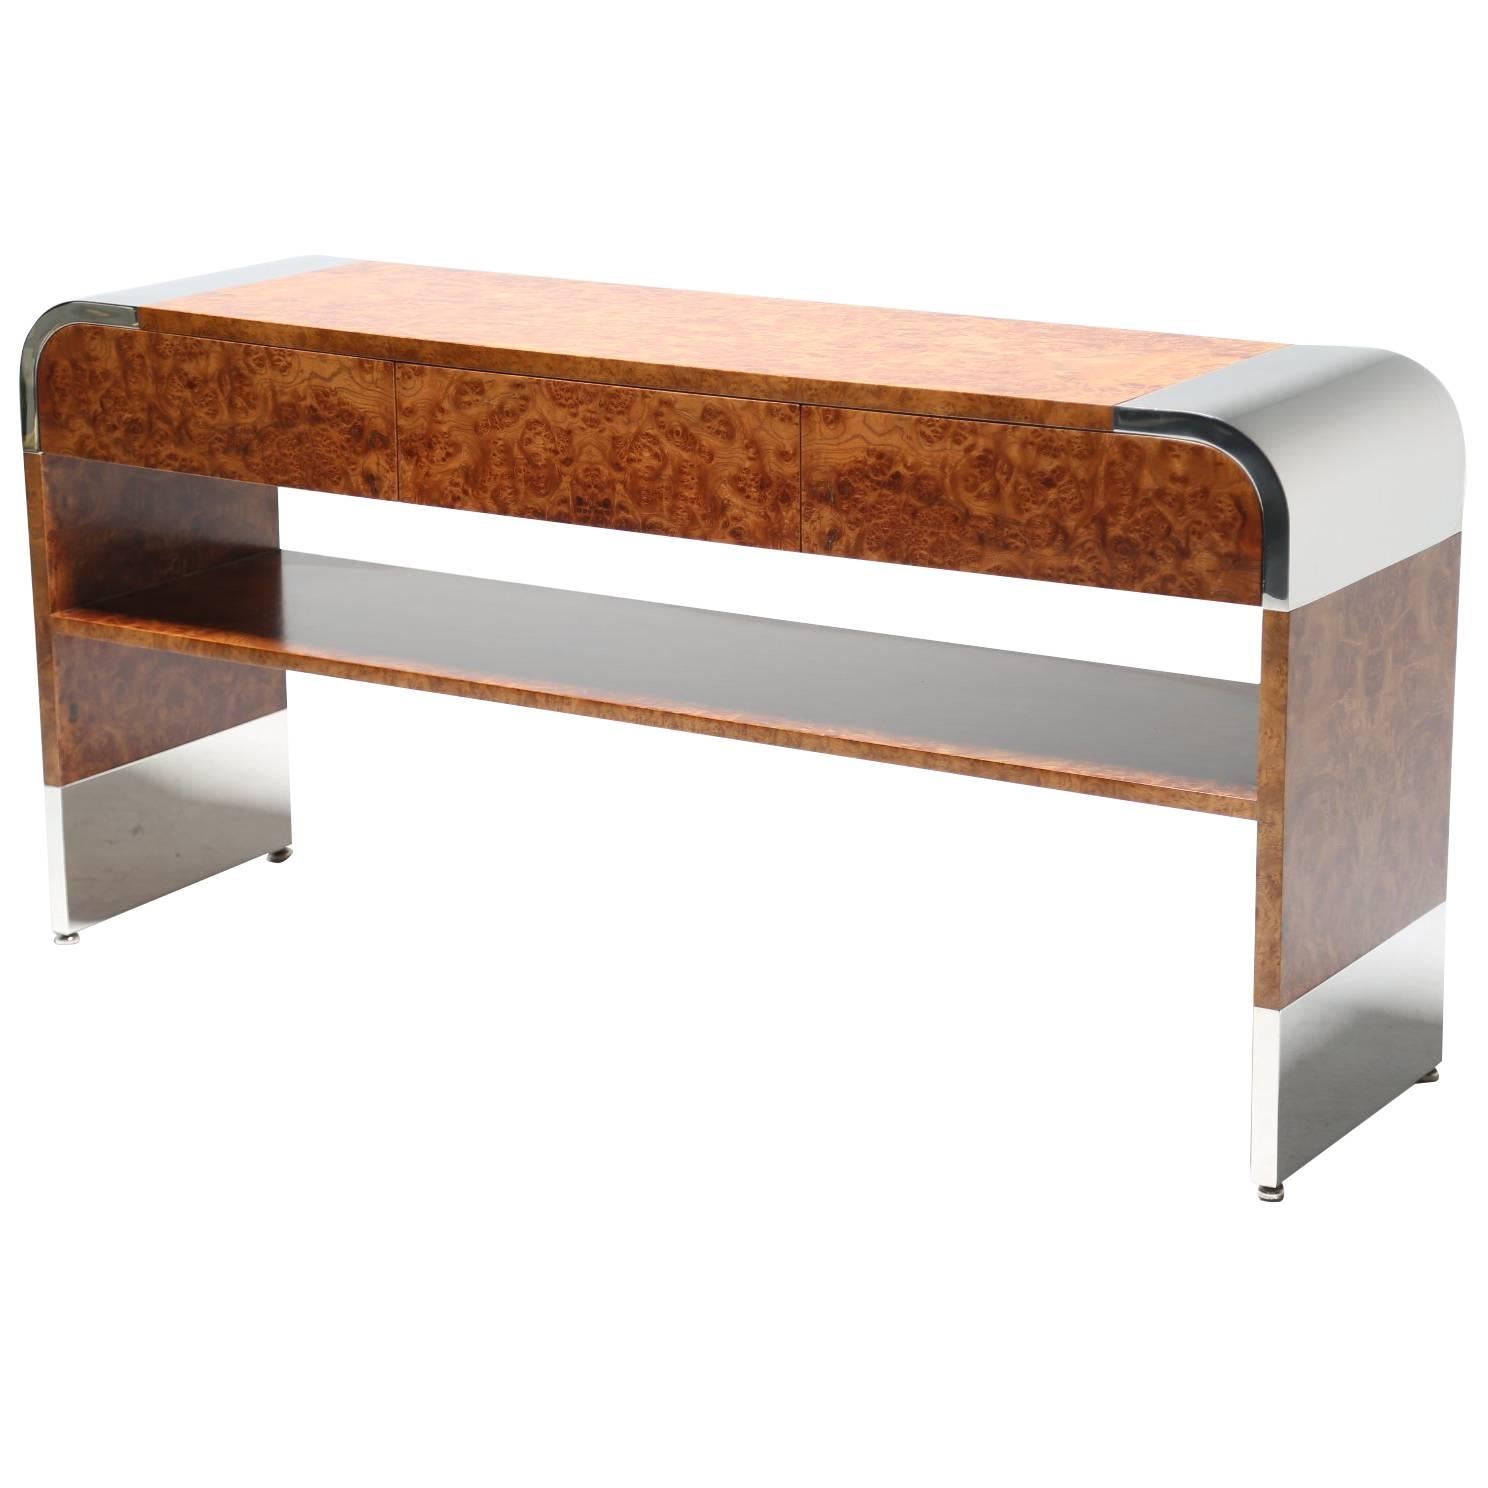 Pace Collection chrome and burlwood console table by Leon & Irving Rosen.